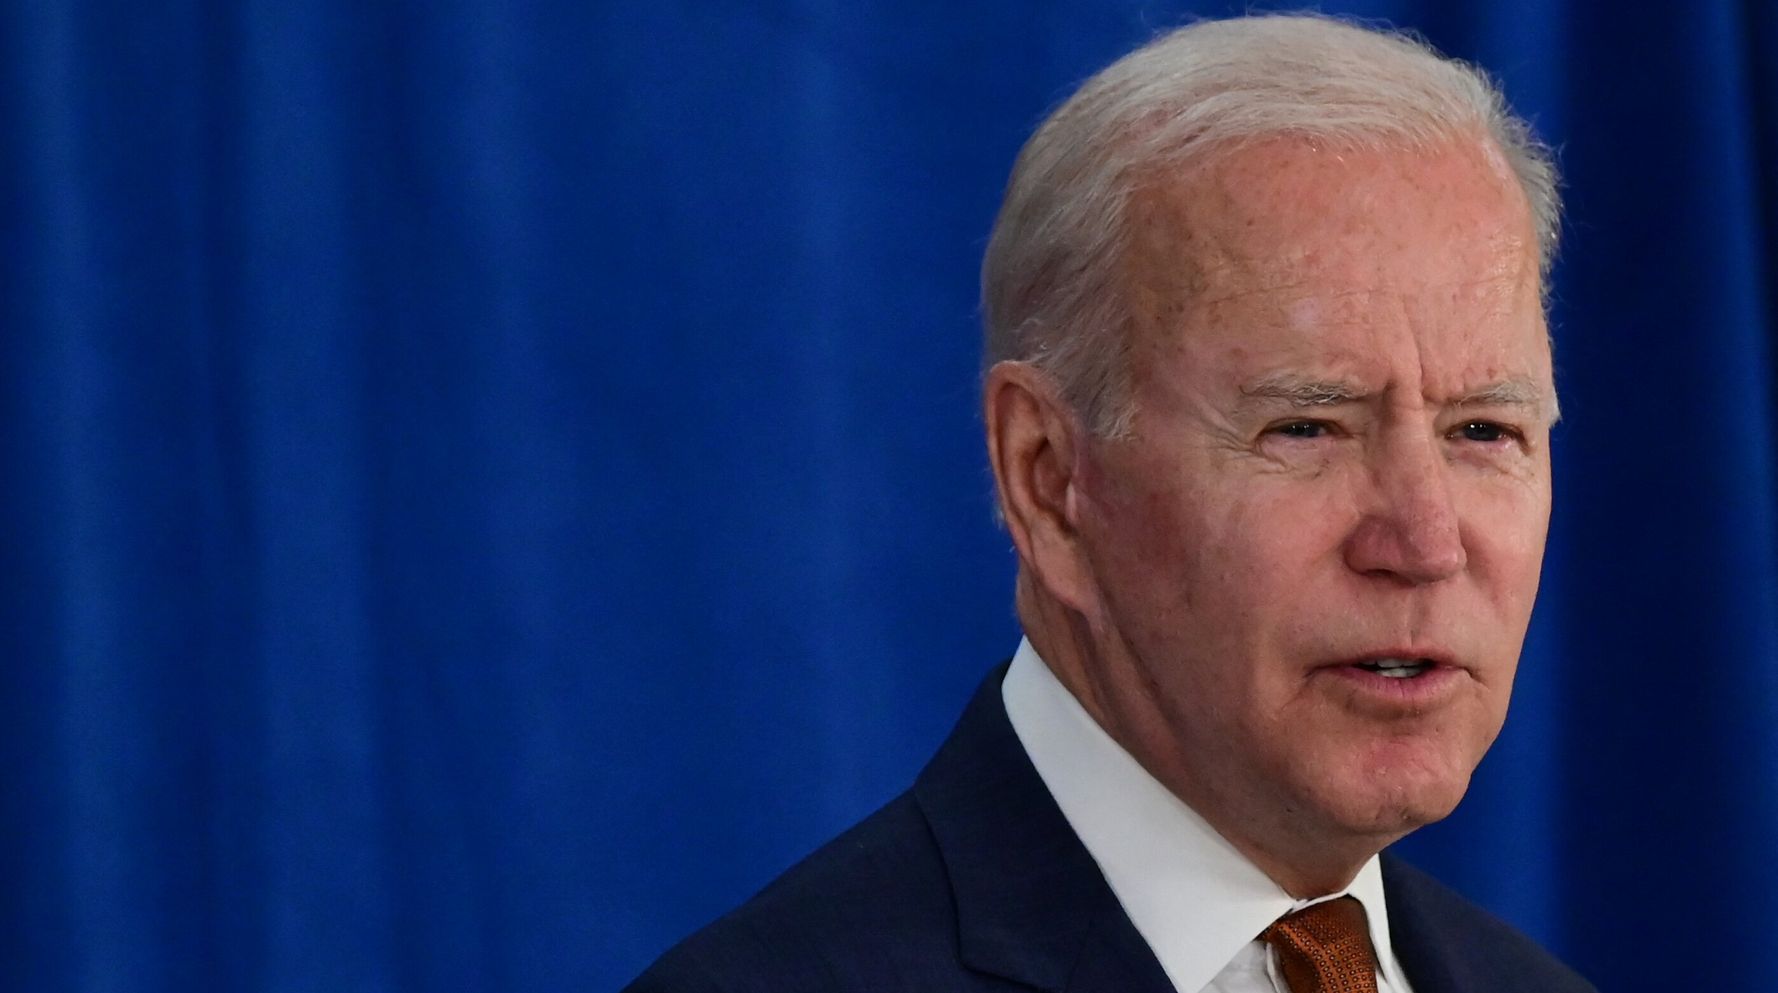 'A Lot Of Anxiety' For Democrats As Biden Agenda Stalls